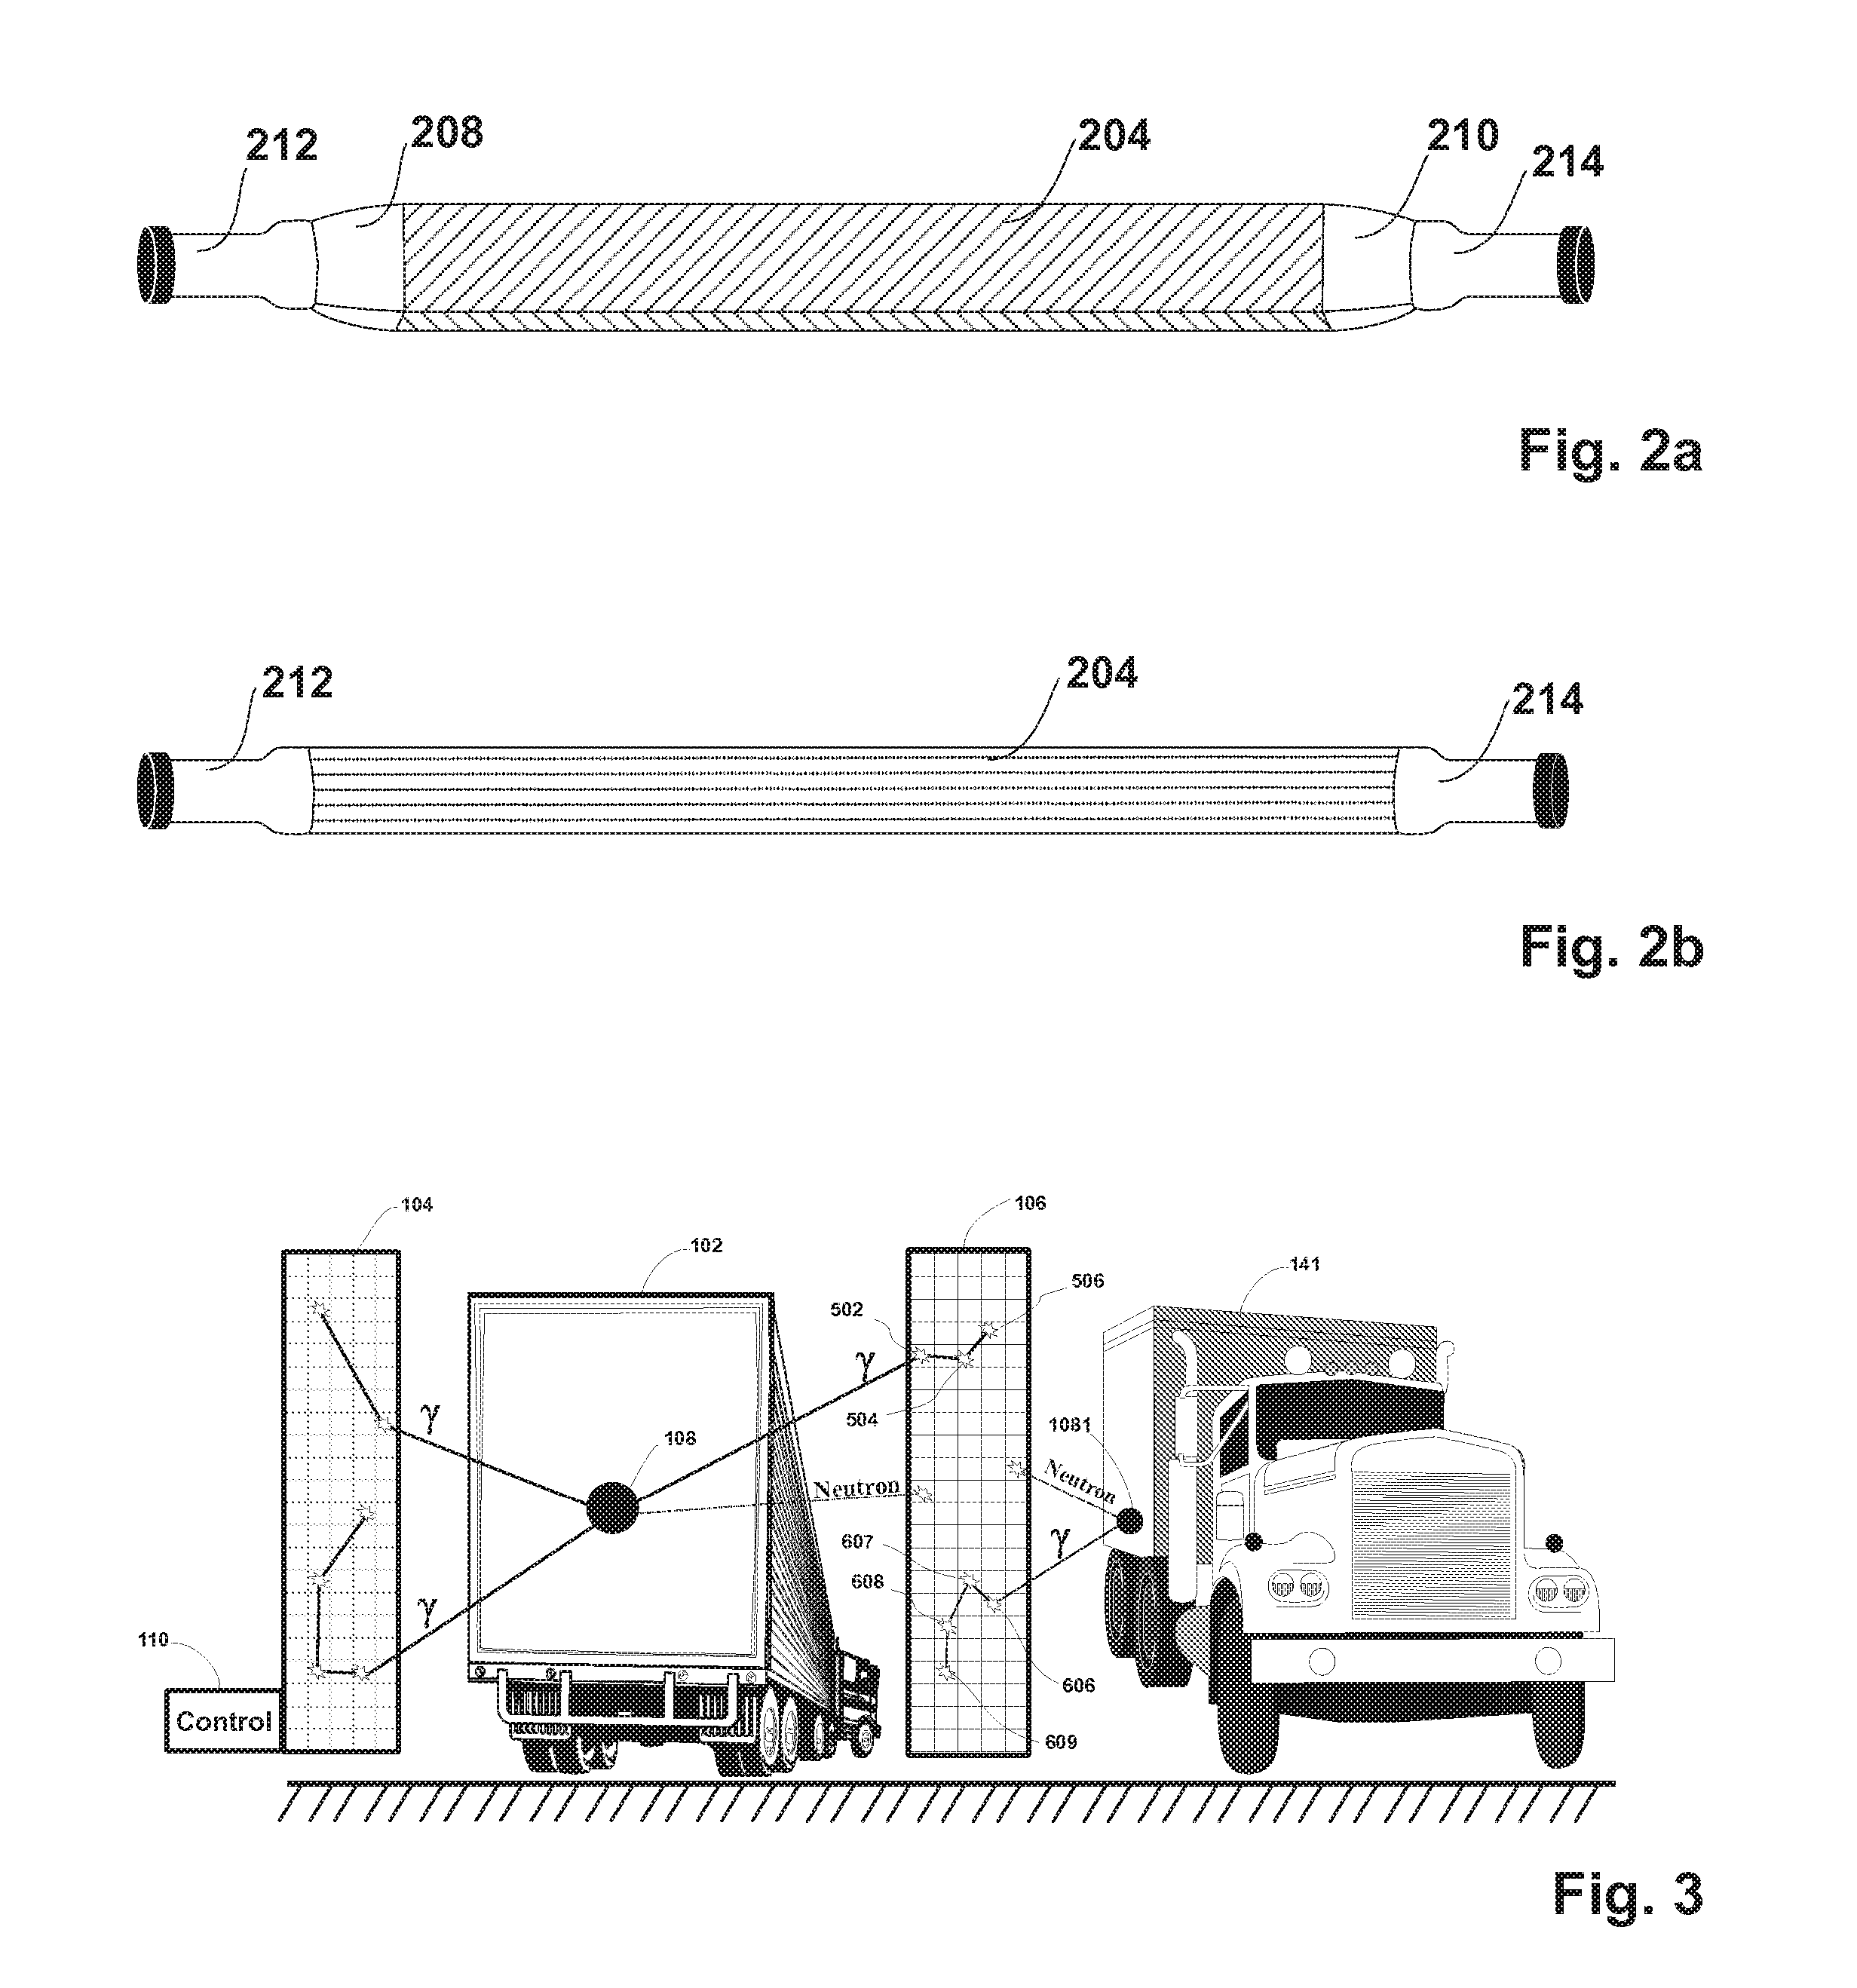 Methods and Apparatus for Improved Gamma Spectra Generation